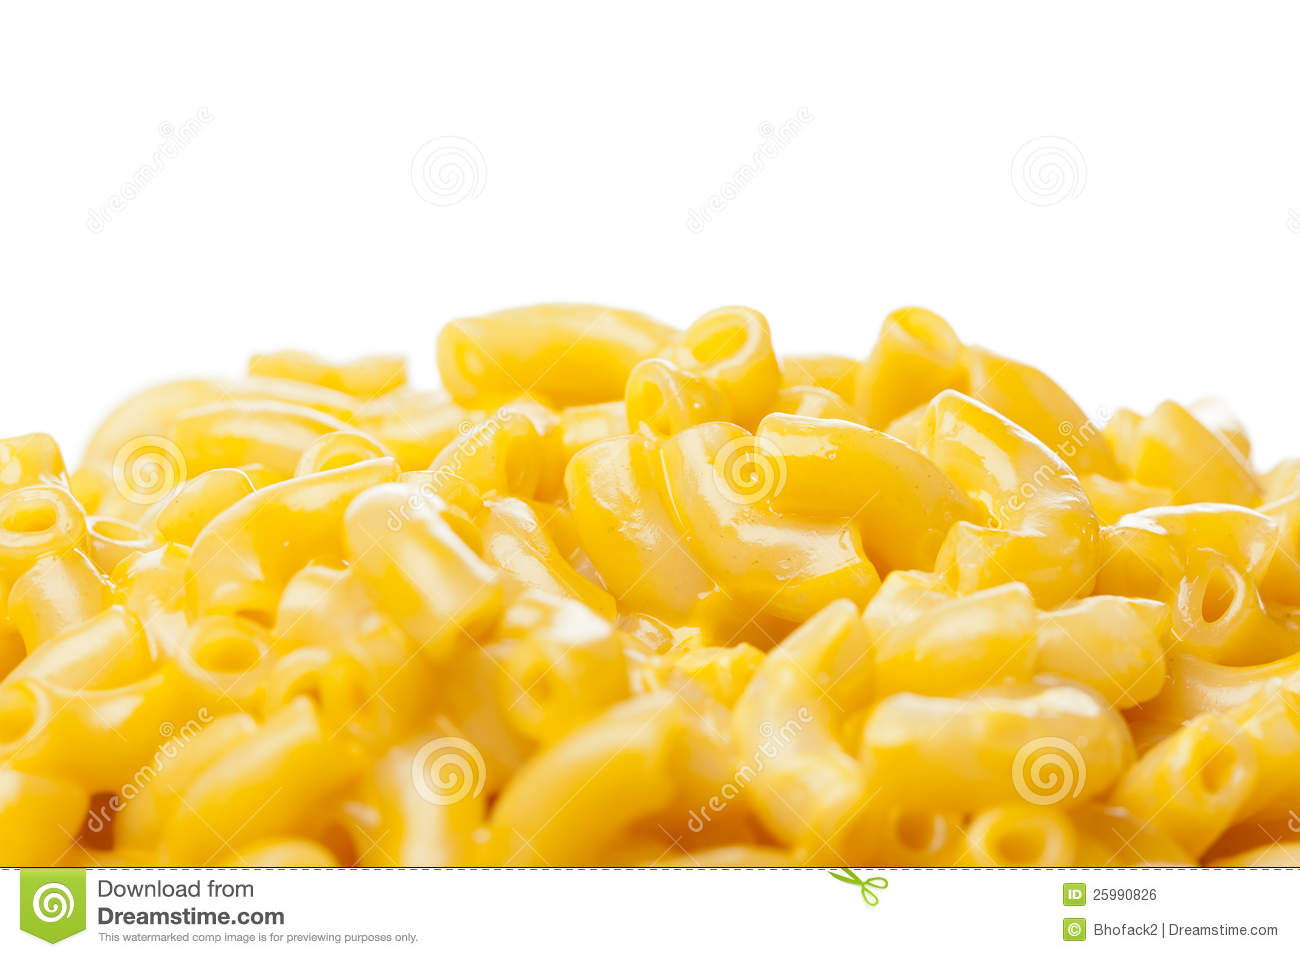 Royalty Free Stock Image  Macaroni And Cheese In A Bowl